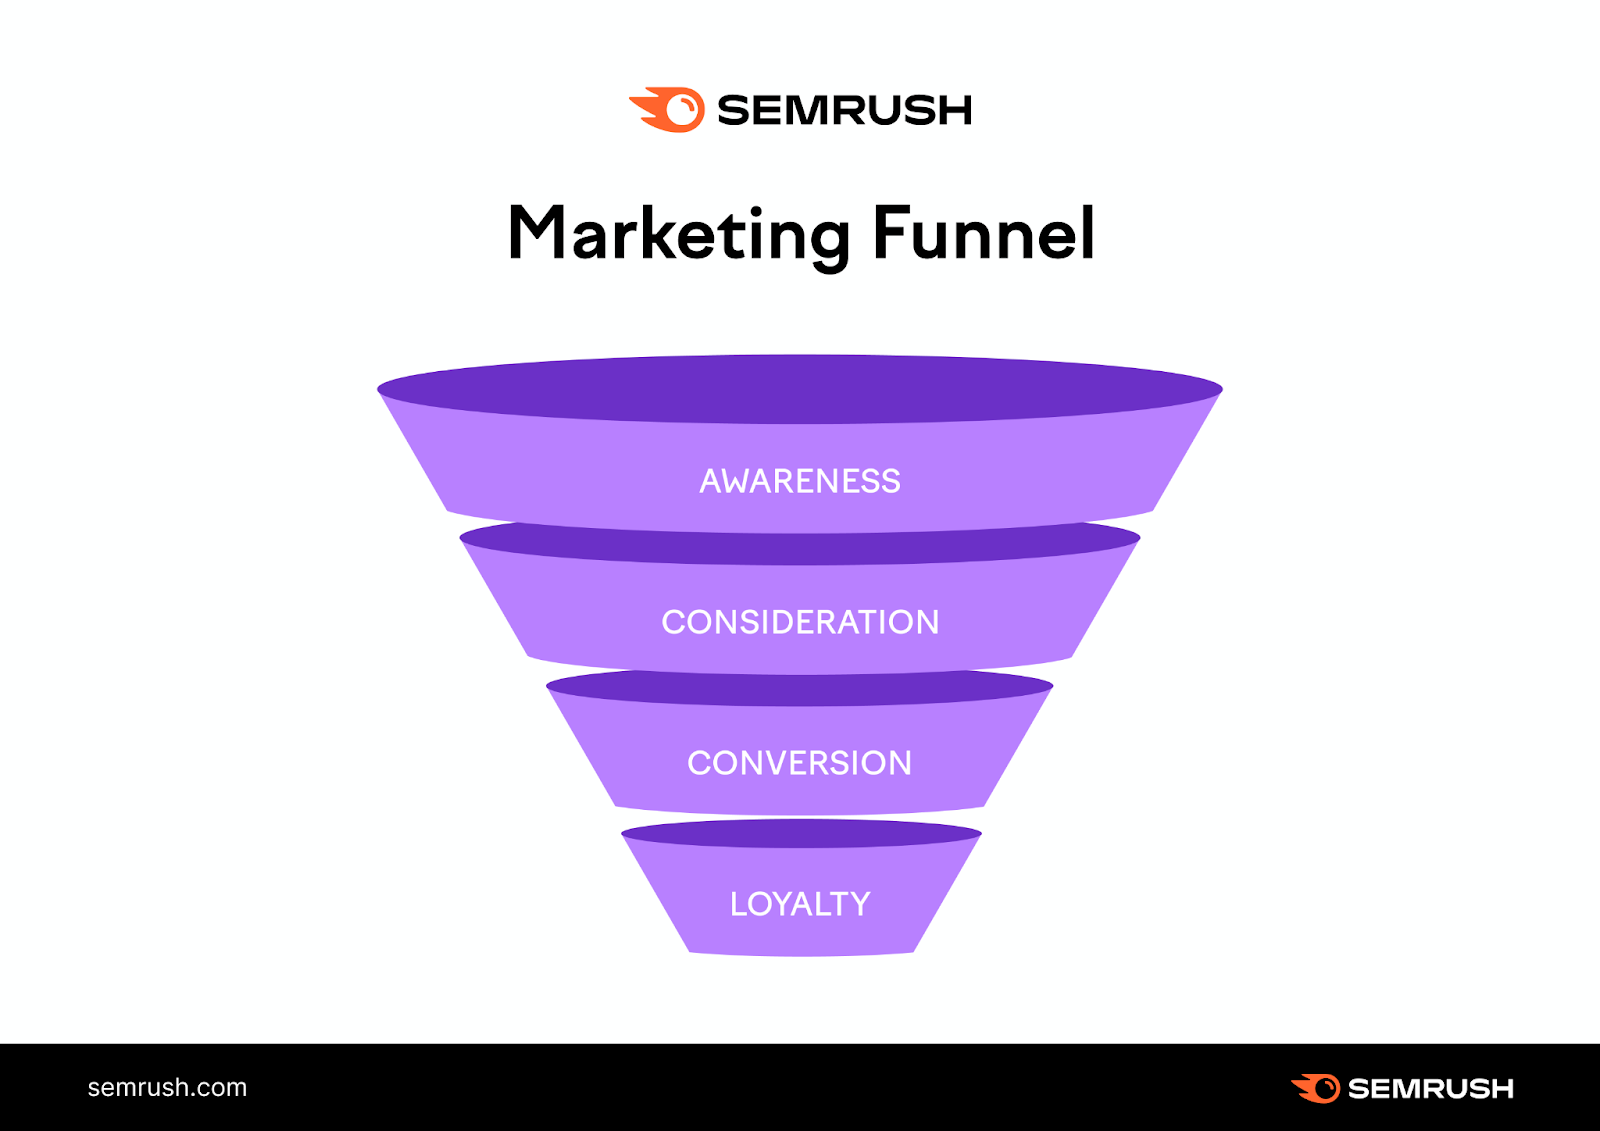 A visual of the marketing funnel